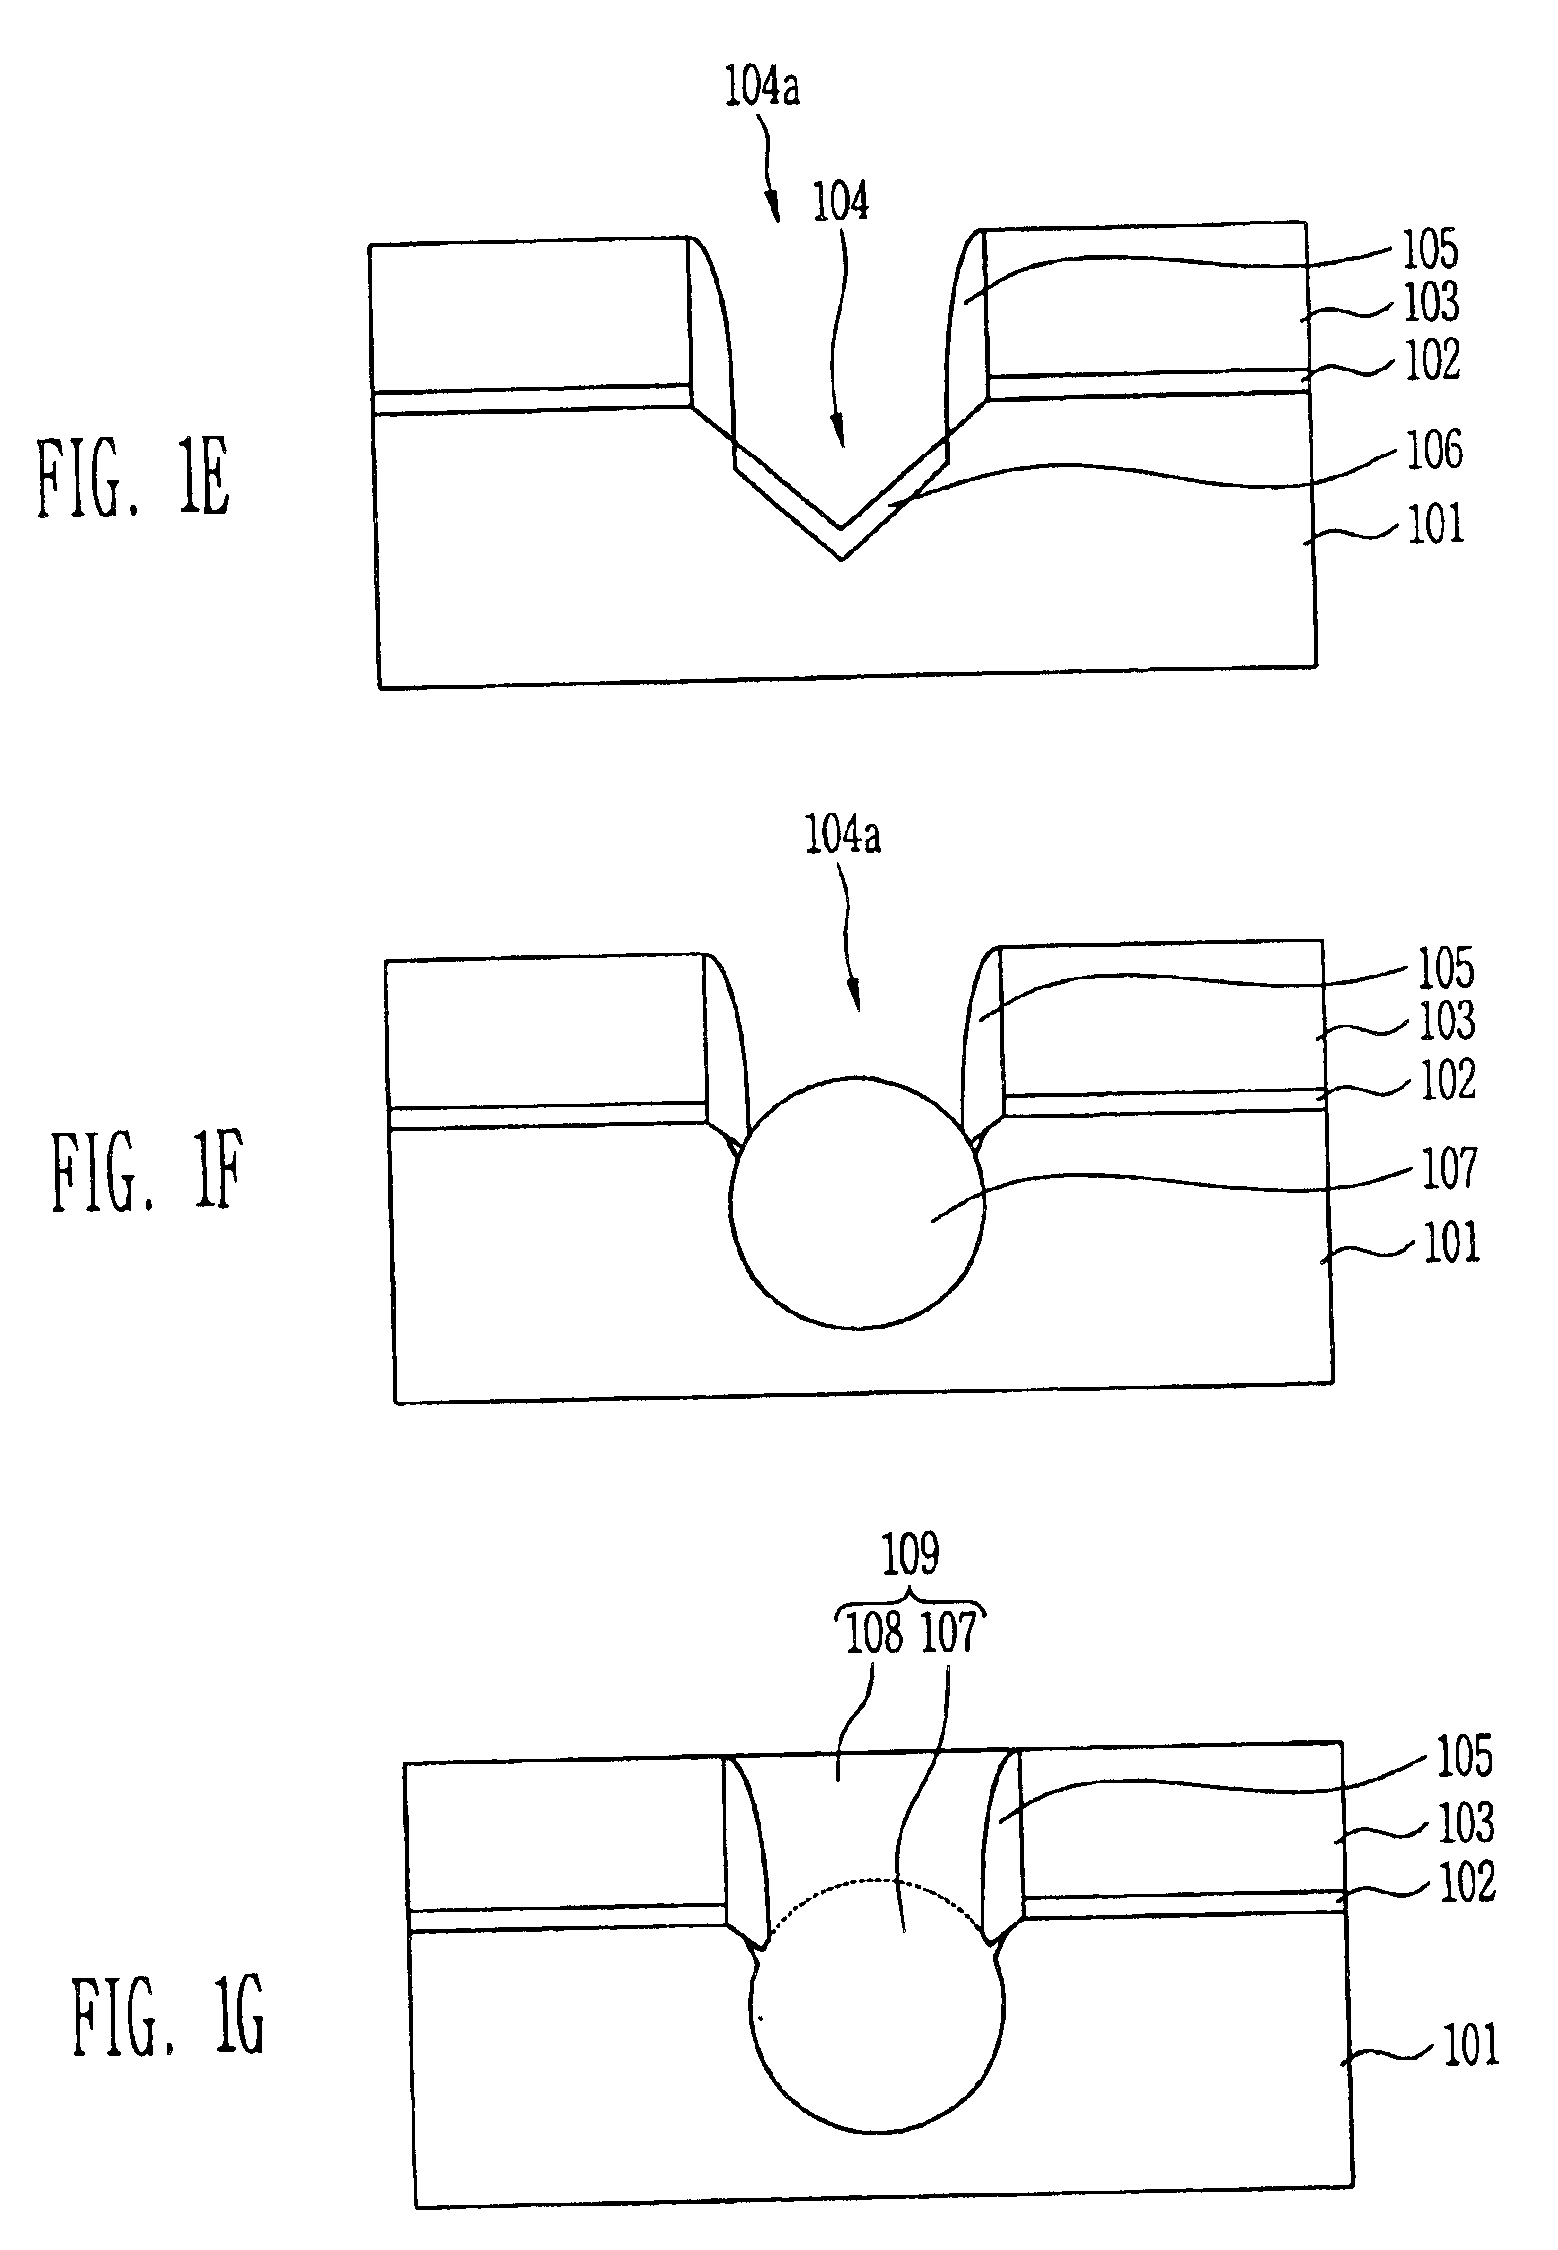 Method of forming an isolation layer in a semiconductor devices